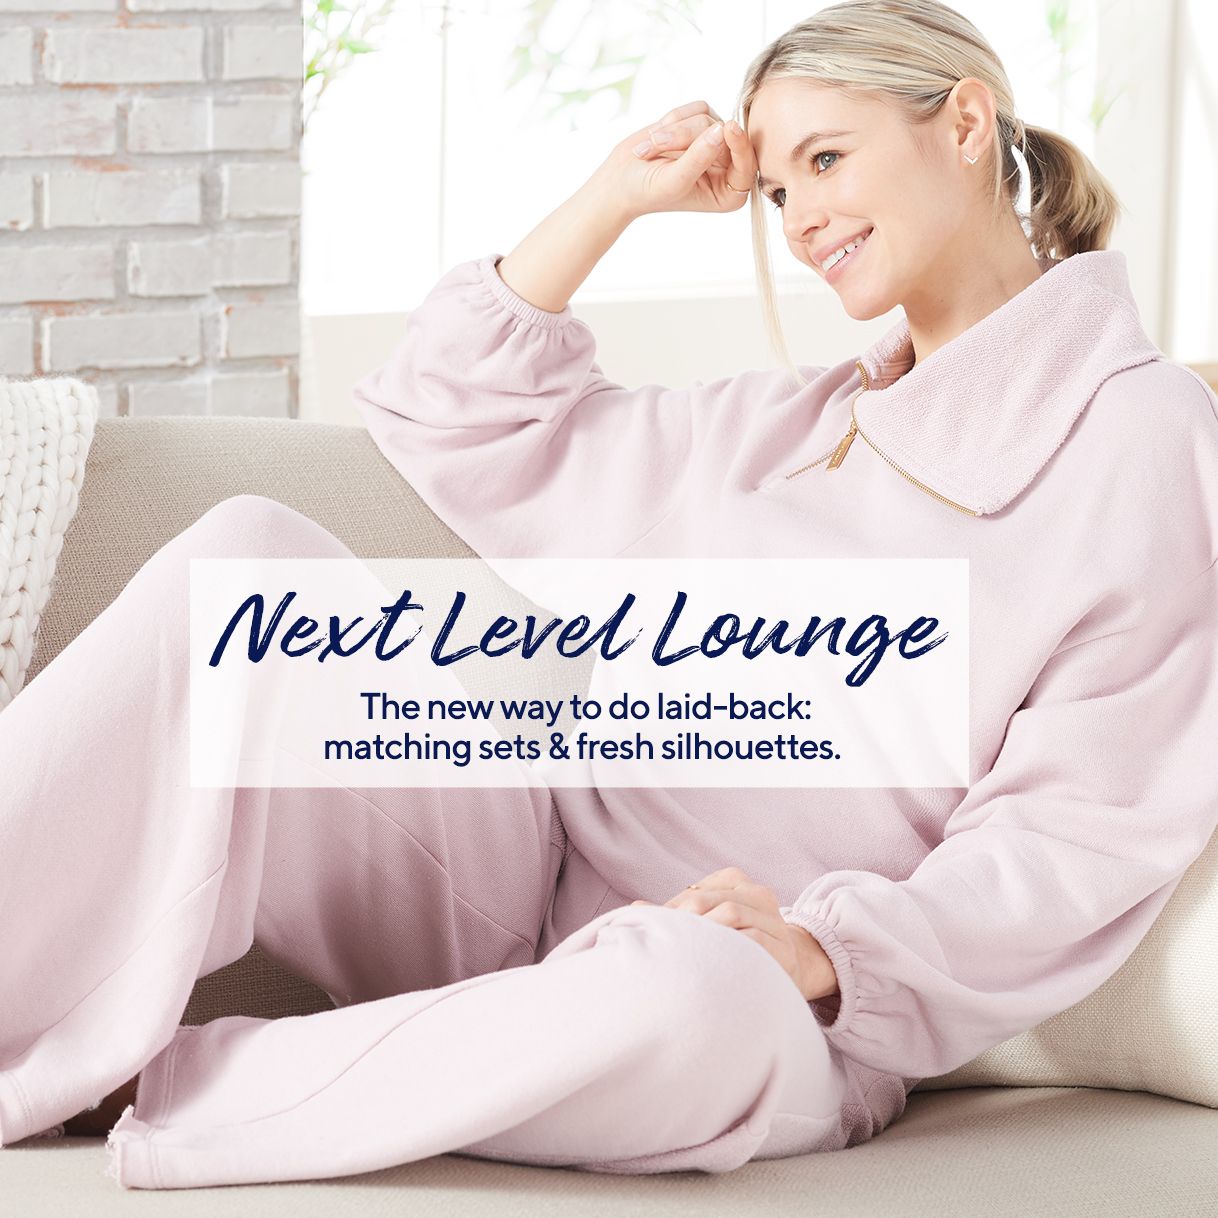 Next-Level Lounge  The new way to do laid-back: matching sets & fresh silhouettes. 